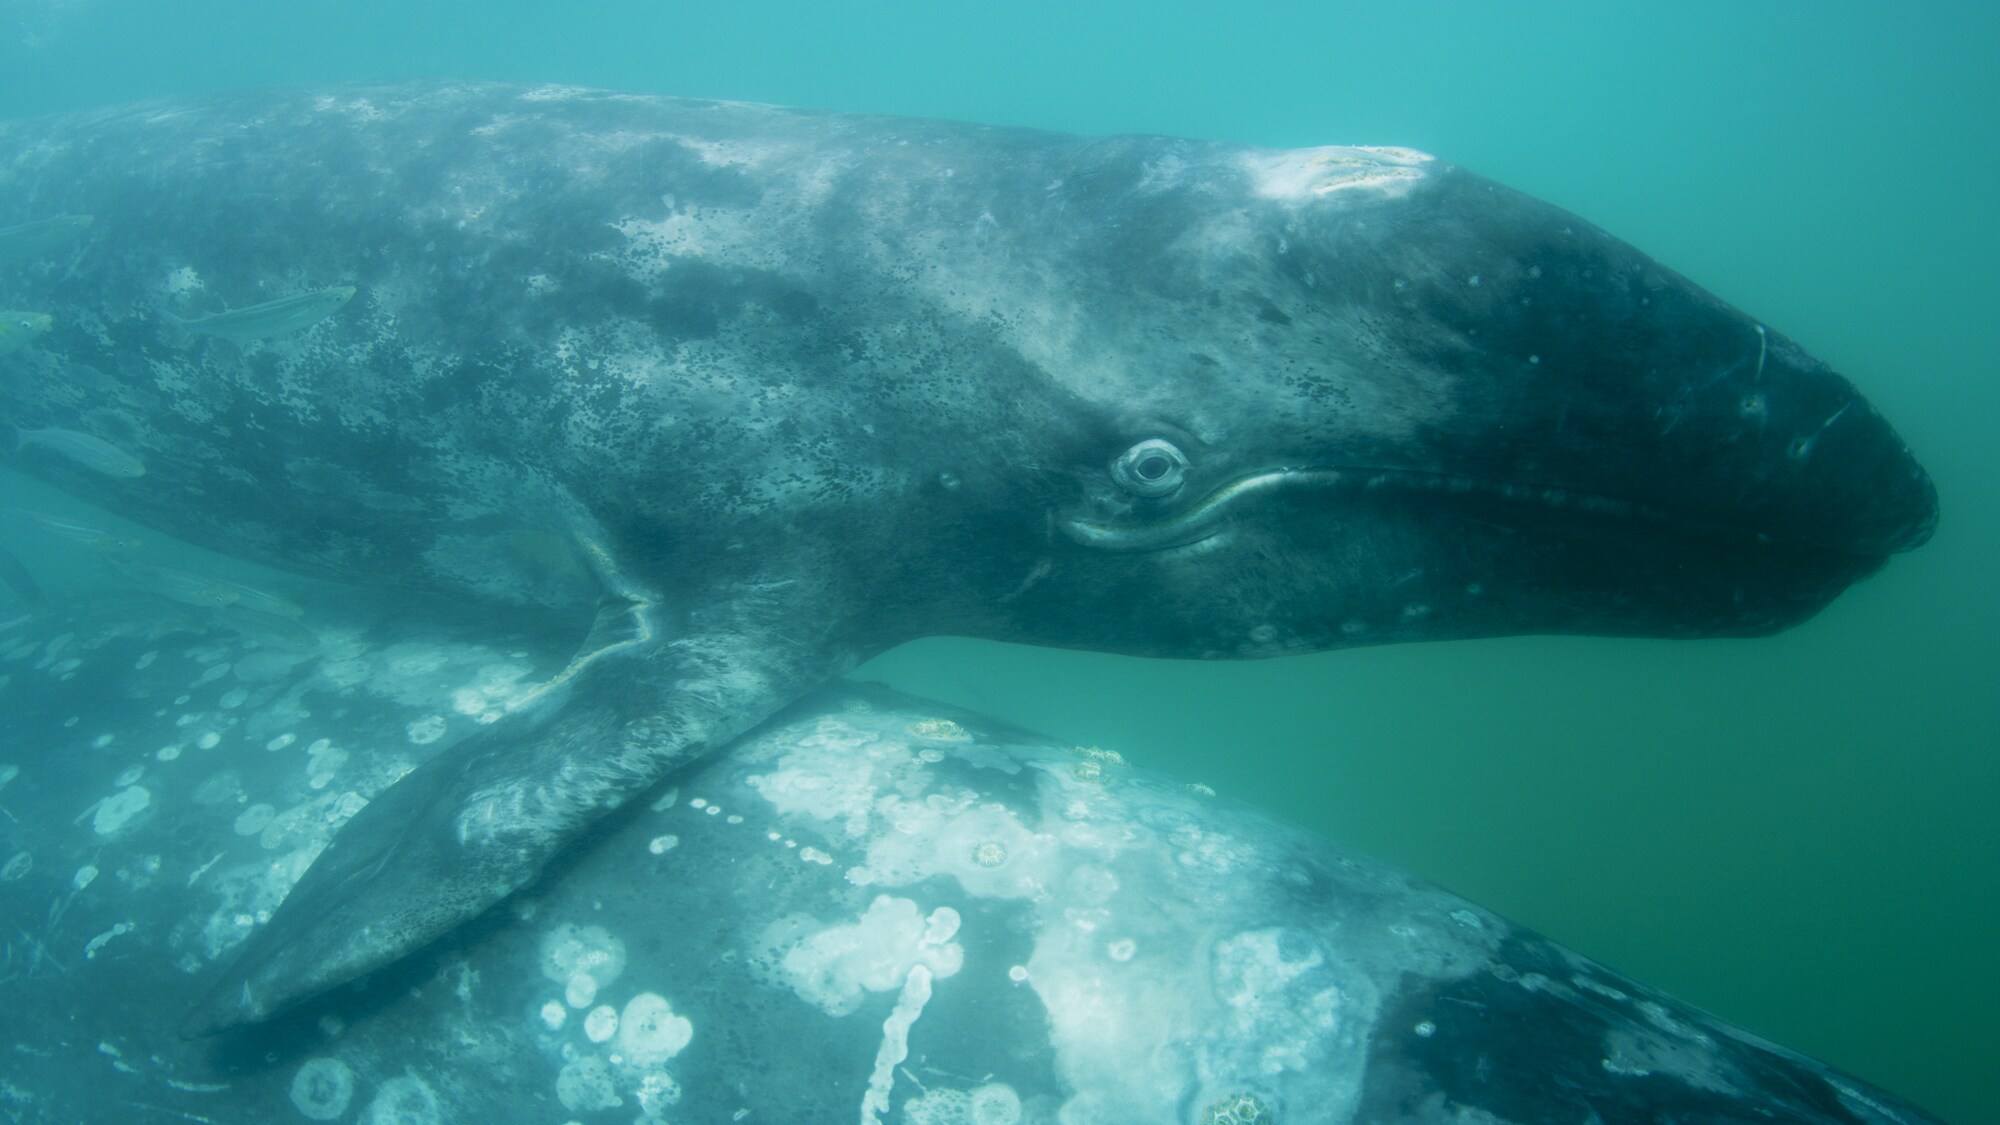 A gray whale calf spends the first weeks of its life in the warm waters of Baja's lagoons, before setting off on one of the longest mammal migrations on Earth up the Pacific coast to their feeding grounds in the Arctic. (National Geographic for Disney+)